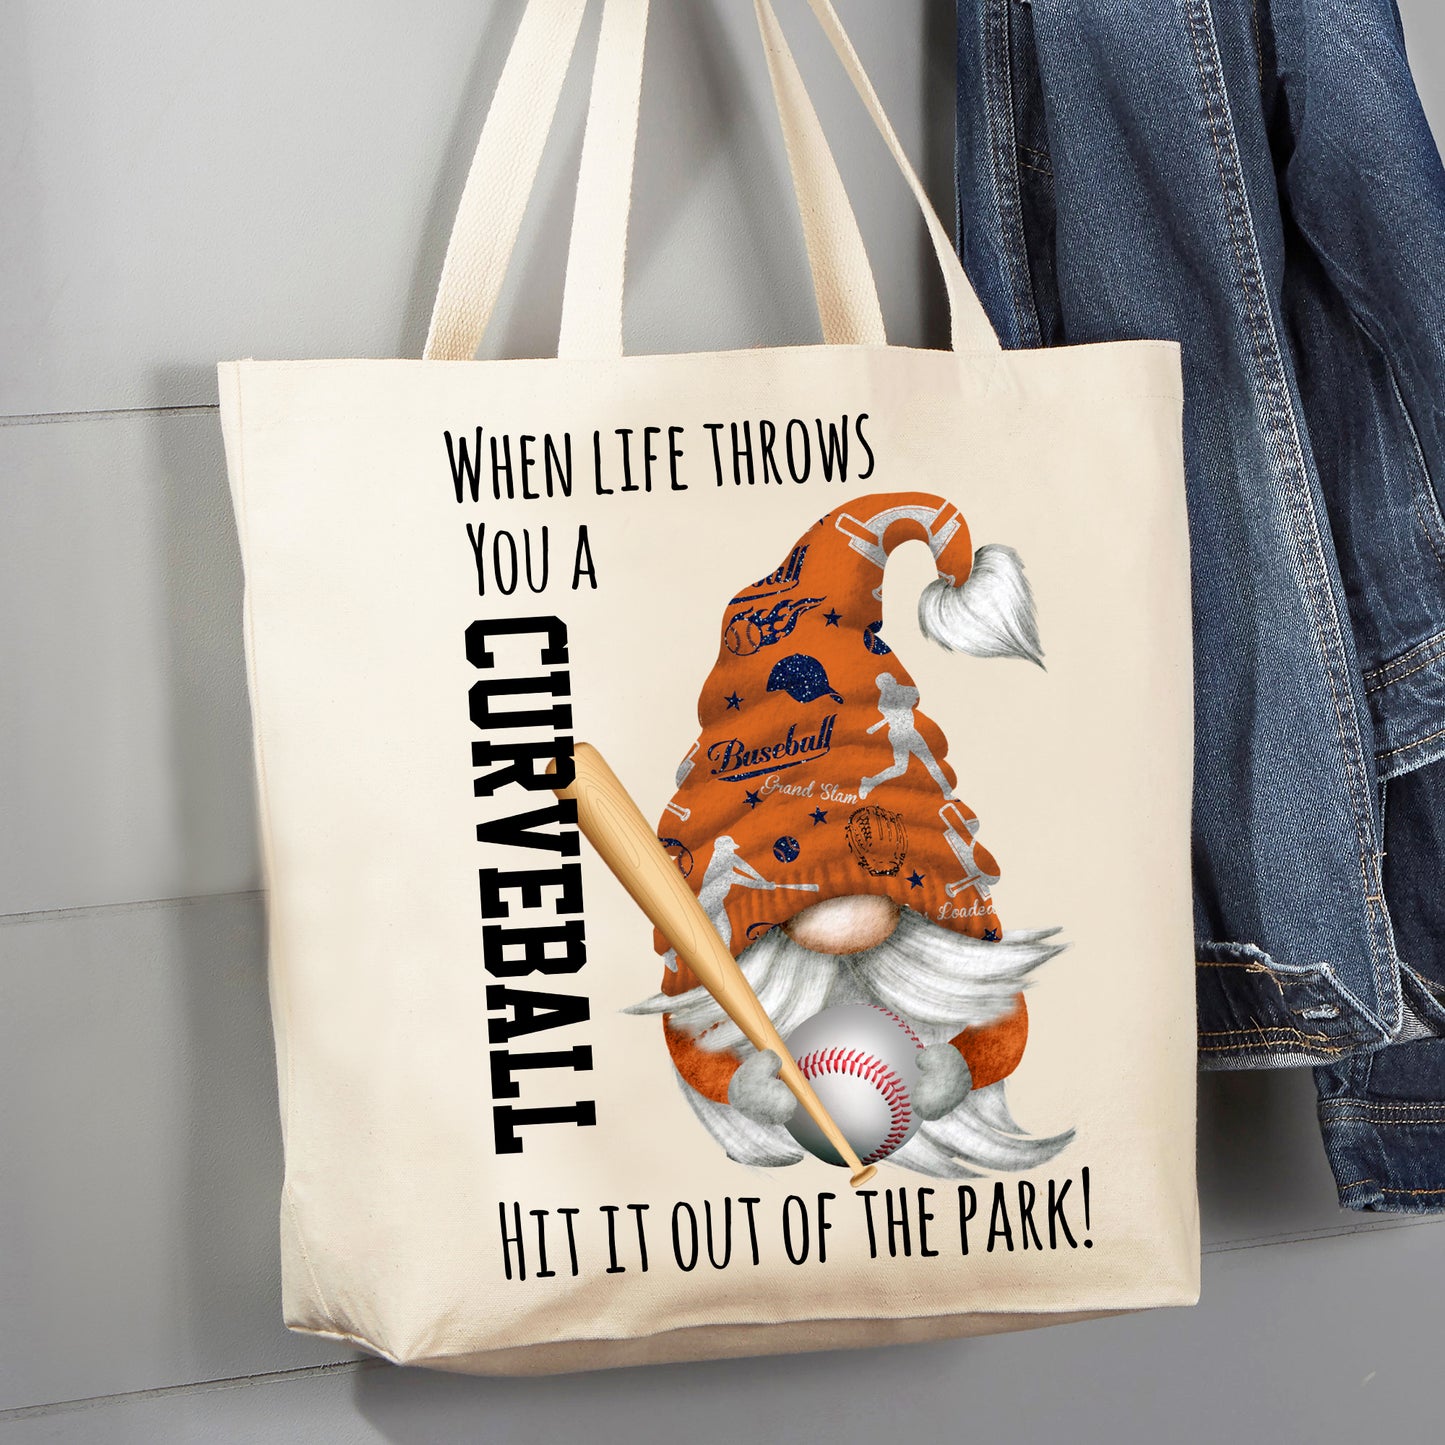 When Life Throws You A Curveball Hit It Out Of The Park 12 oz Canvas Tote Bag